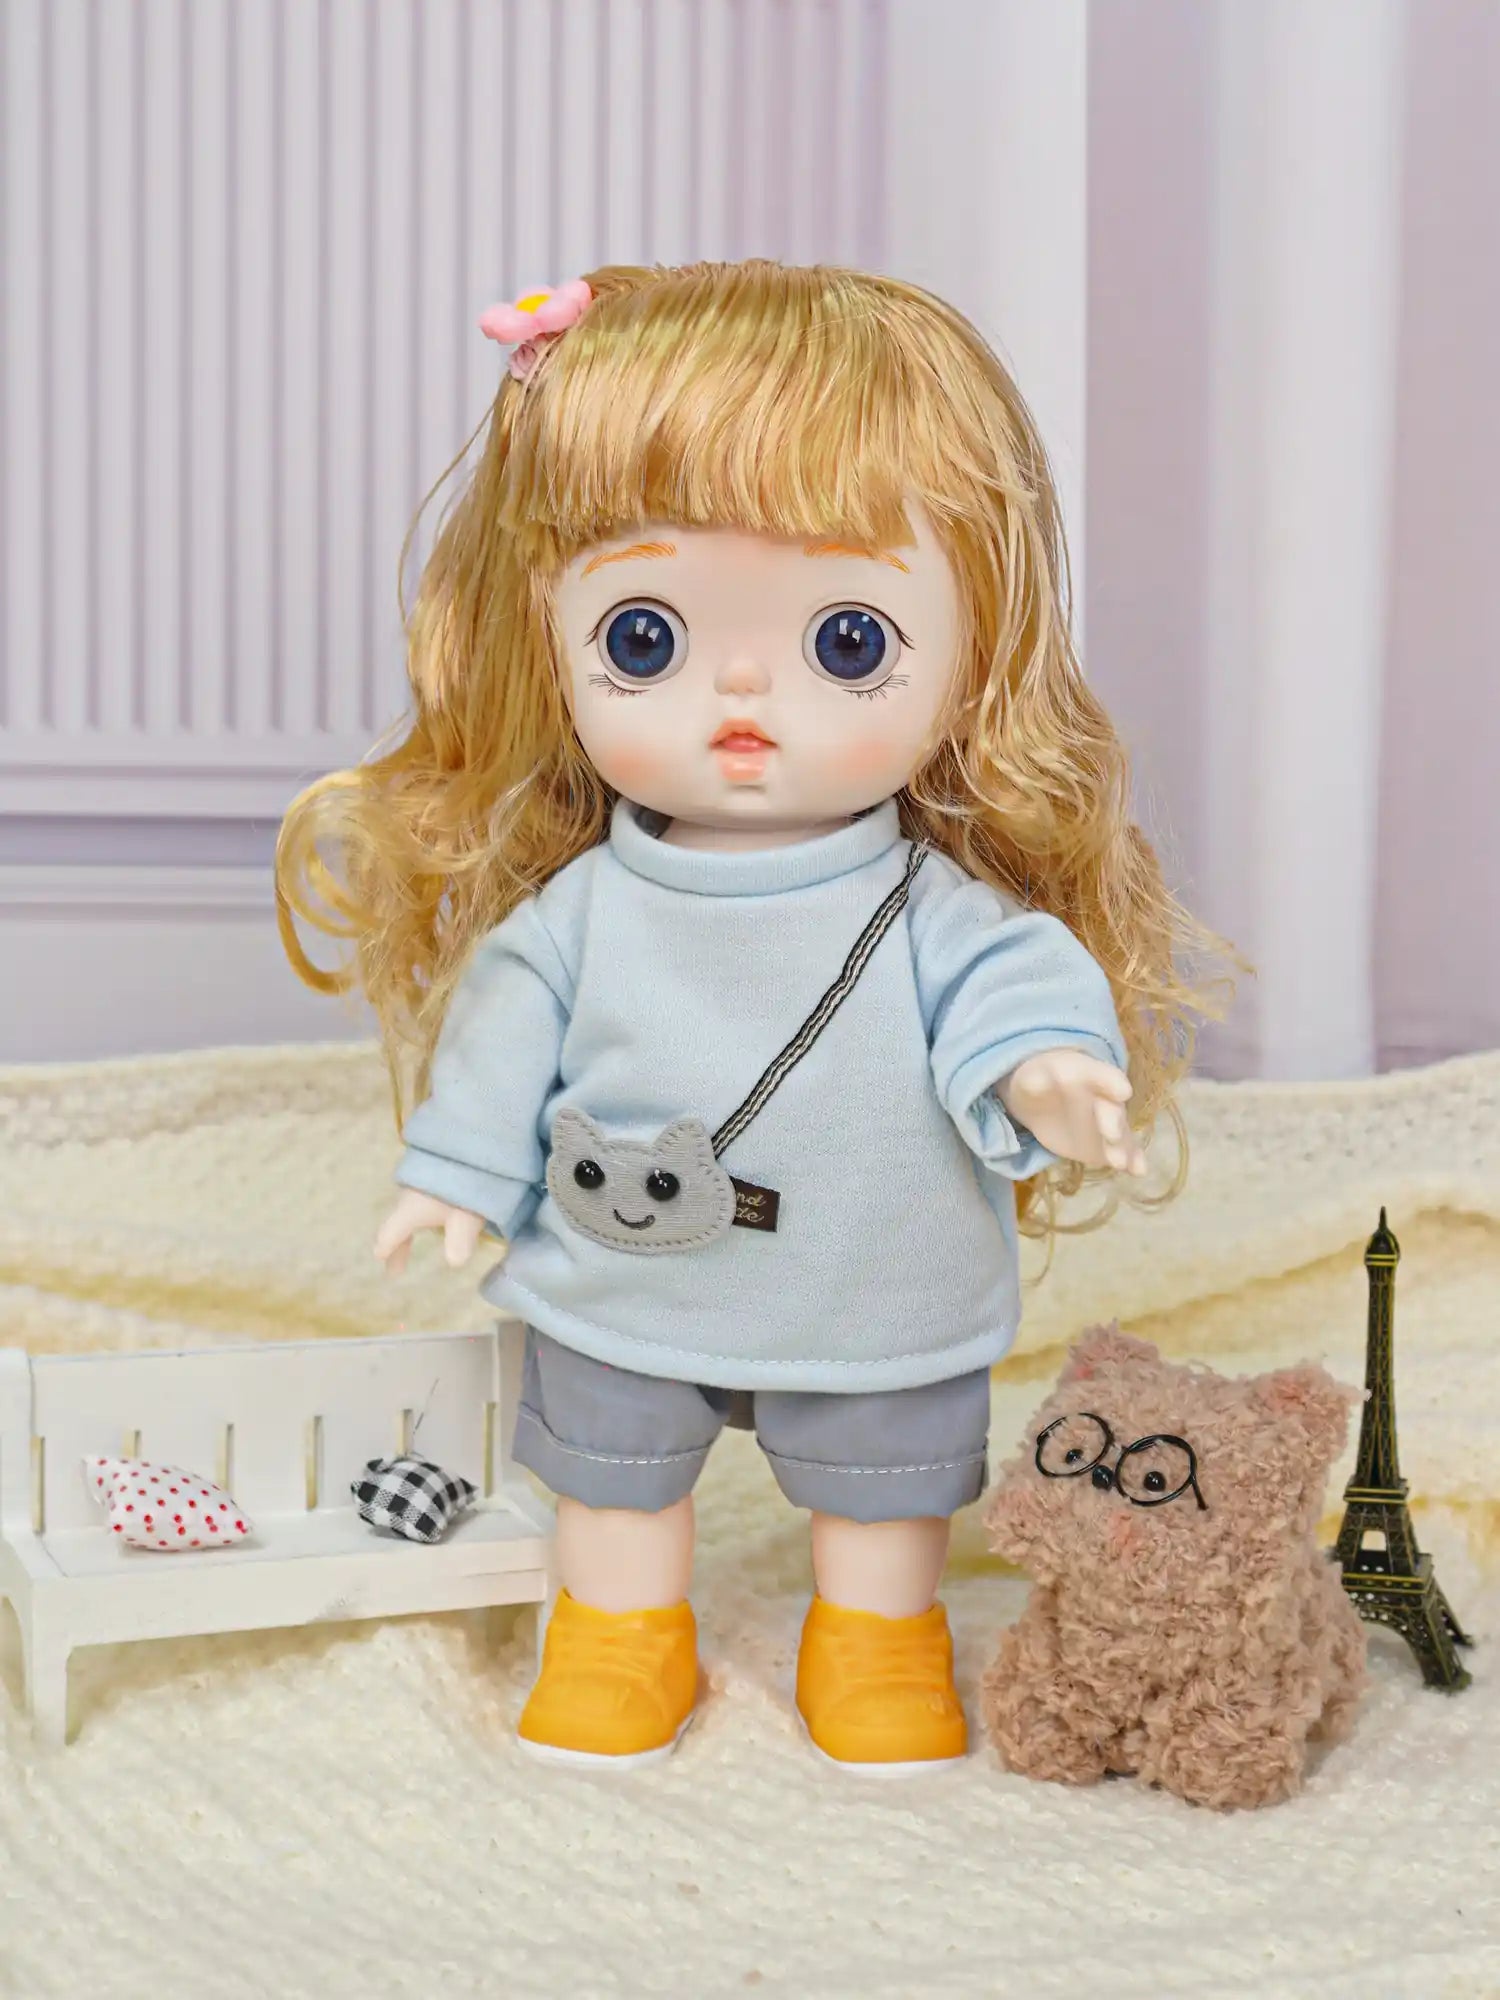 Doll with blonde curly hair and big blue eyes, dressed in a blue sweatshirt and grey shorts, accompanied by a plush toy.